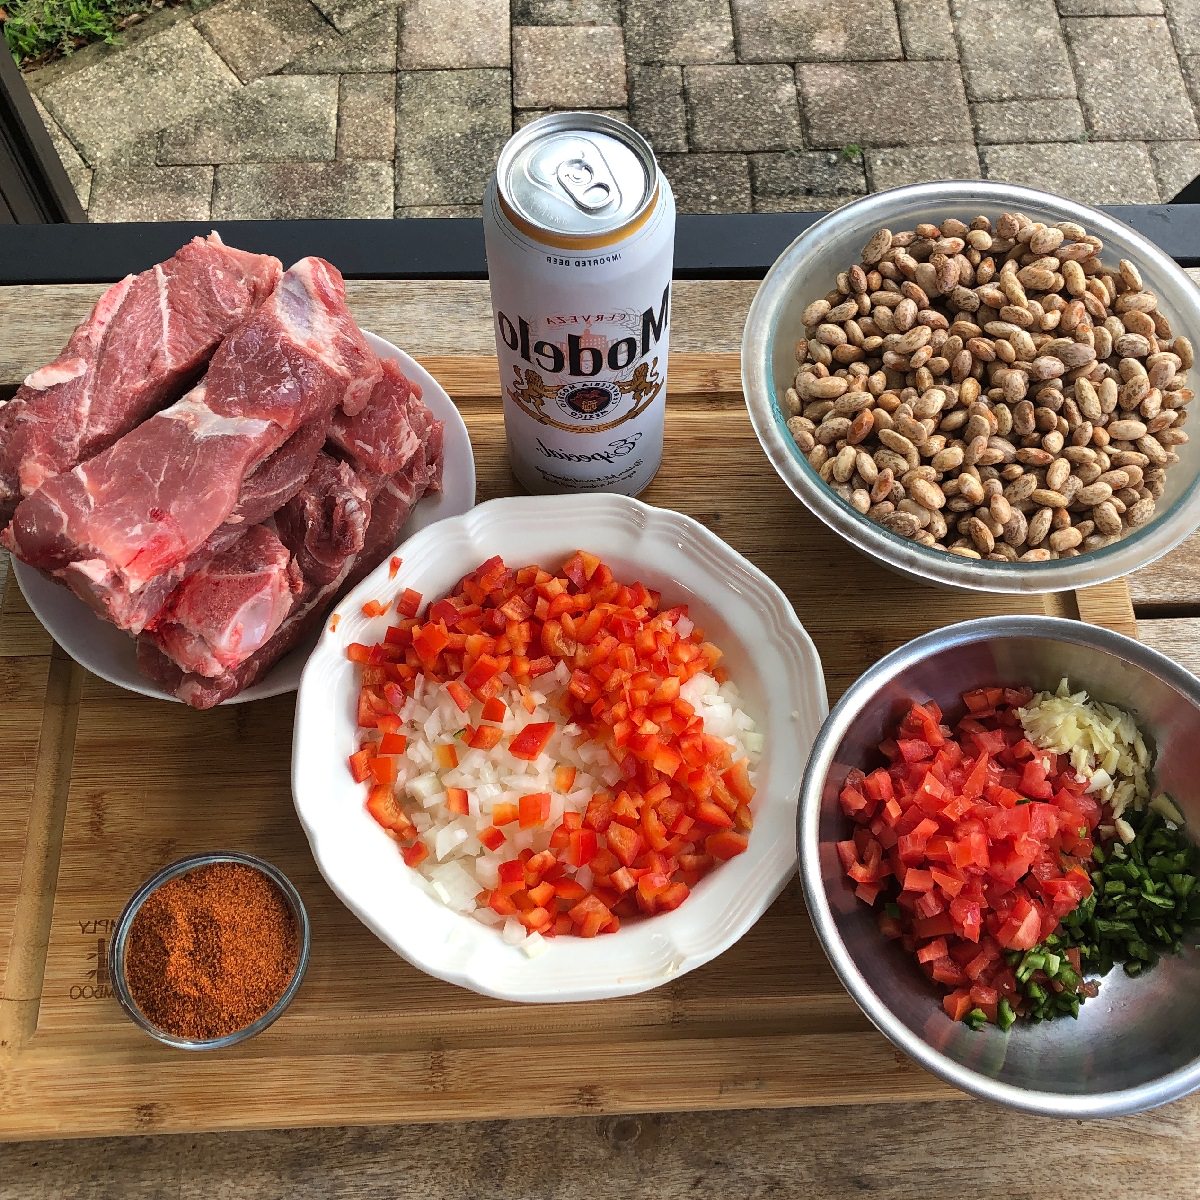 Ingredients for DrBBQ's Chile Country Style Ribs with Borracho Beans